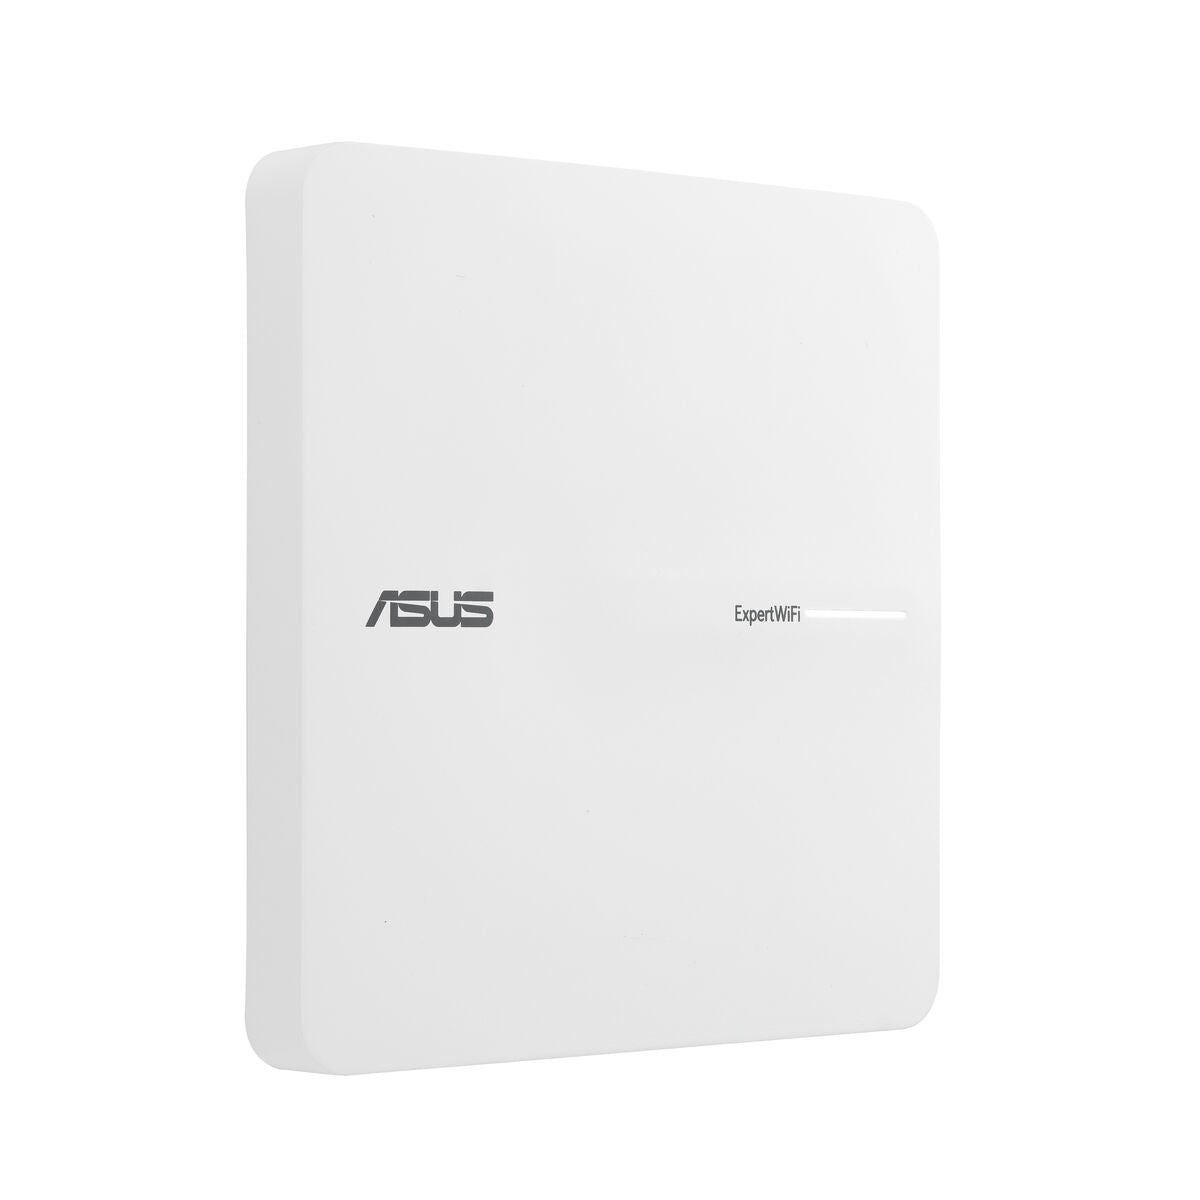 Access point Asus EBA63 ExpertWiFi AX3000 White, Asus, Computing, Network devices, access-point-asus-eba63-expertwifi-ax3000-white, Brand_Asus, category-reference-2609, category-reference-2803, category-reference-2820, category-reference-t-19685, category-reference-t-19914, category-reference-t-21369, Condition_NEW, networks/wiring, Price_100 - 200, Teleworking, RiotNook